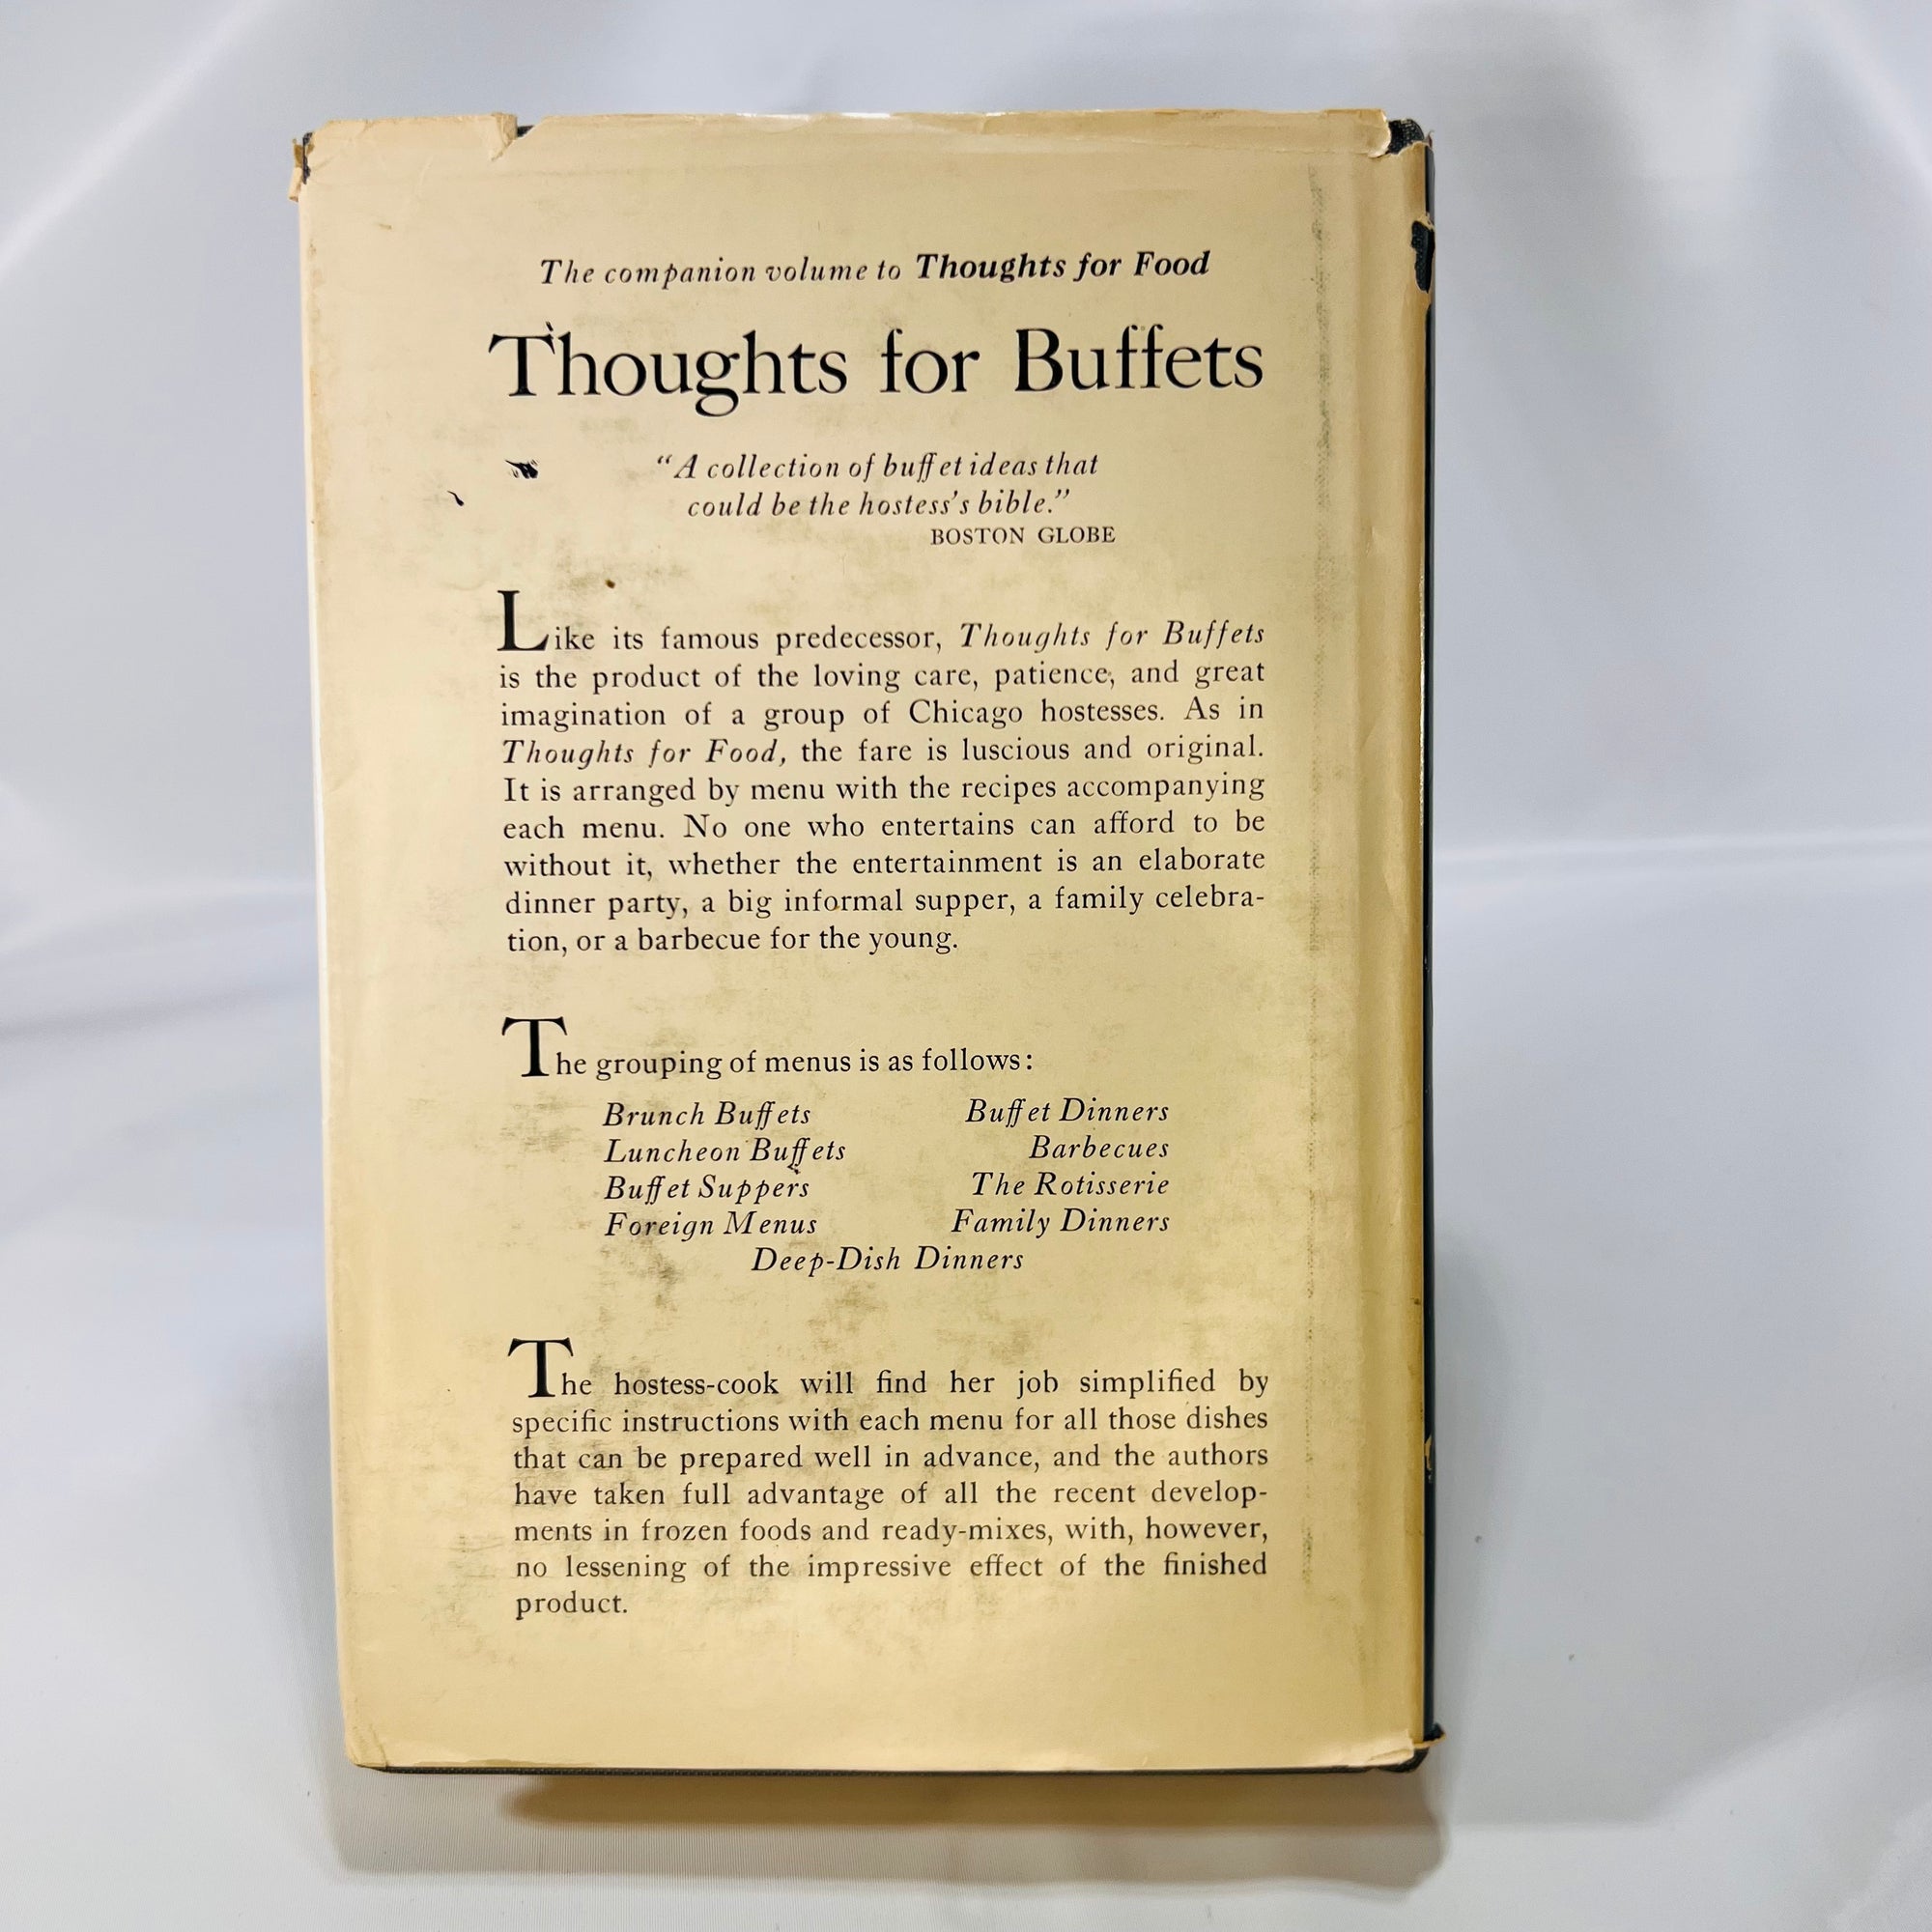 Thoughts for Food by unknown Houghton Mifflin Company 1946 Menu Cook Book